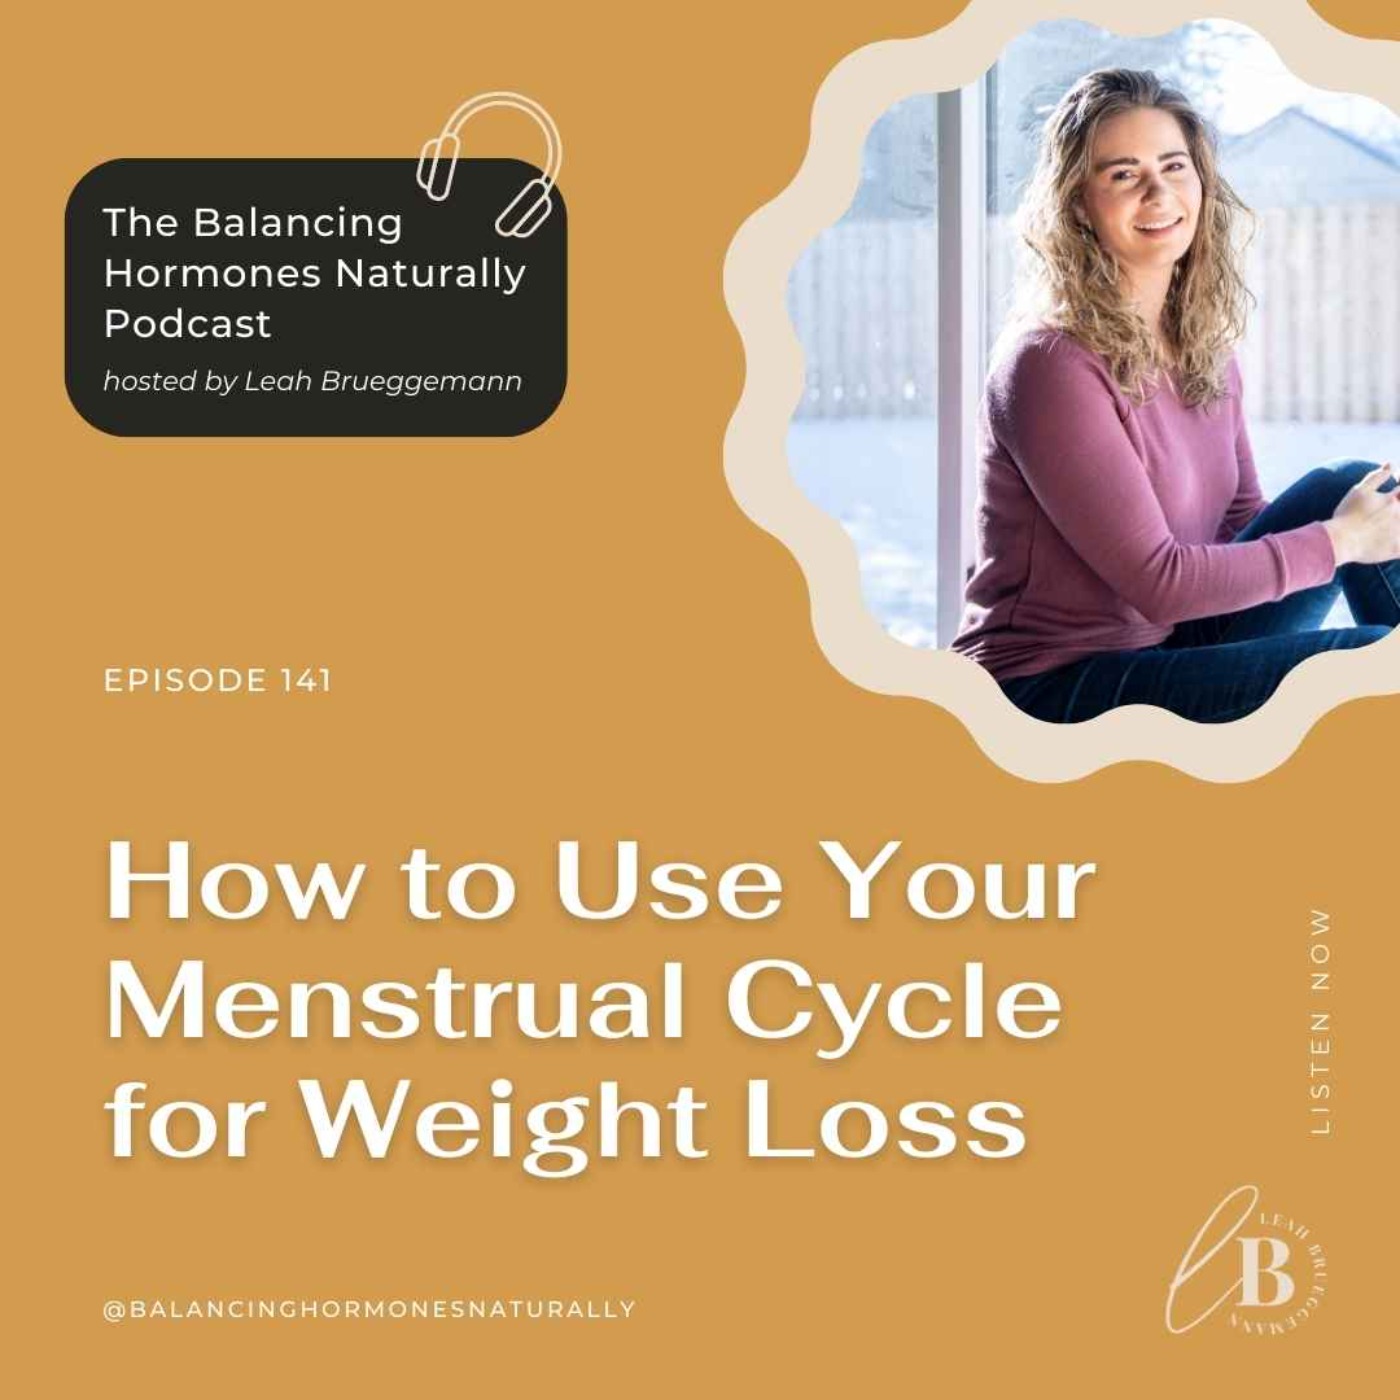 Episode 141: How to Use Your Menstrual Cycle for Weight Loss